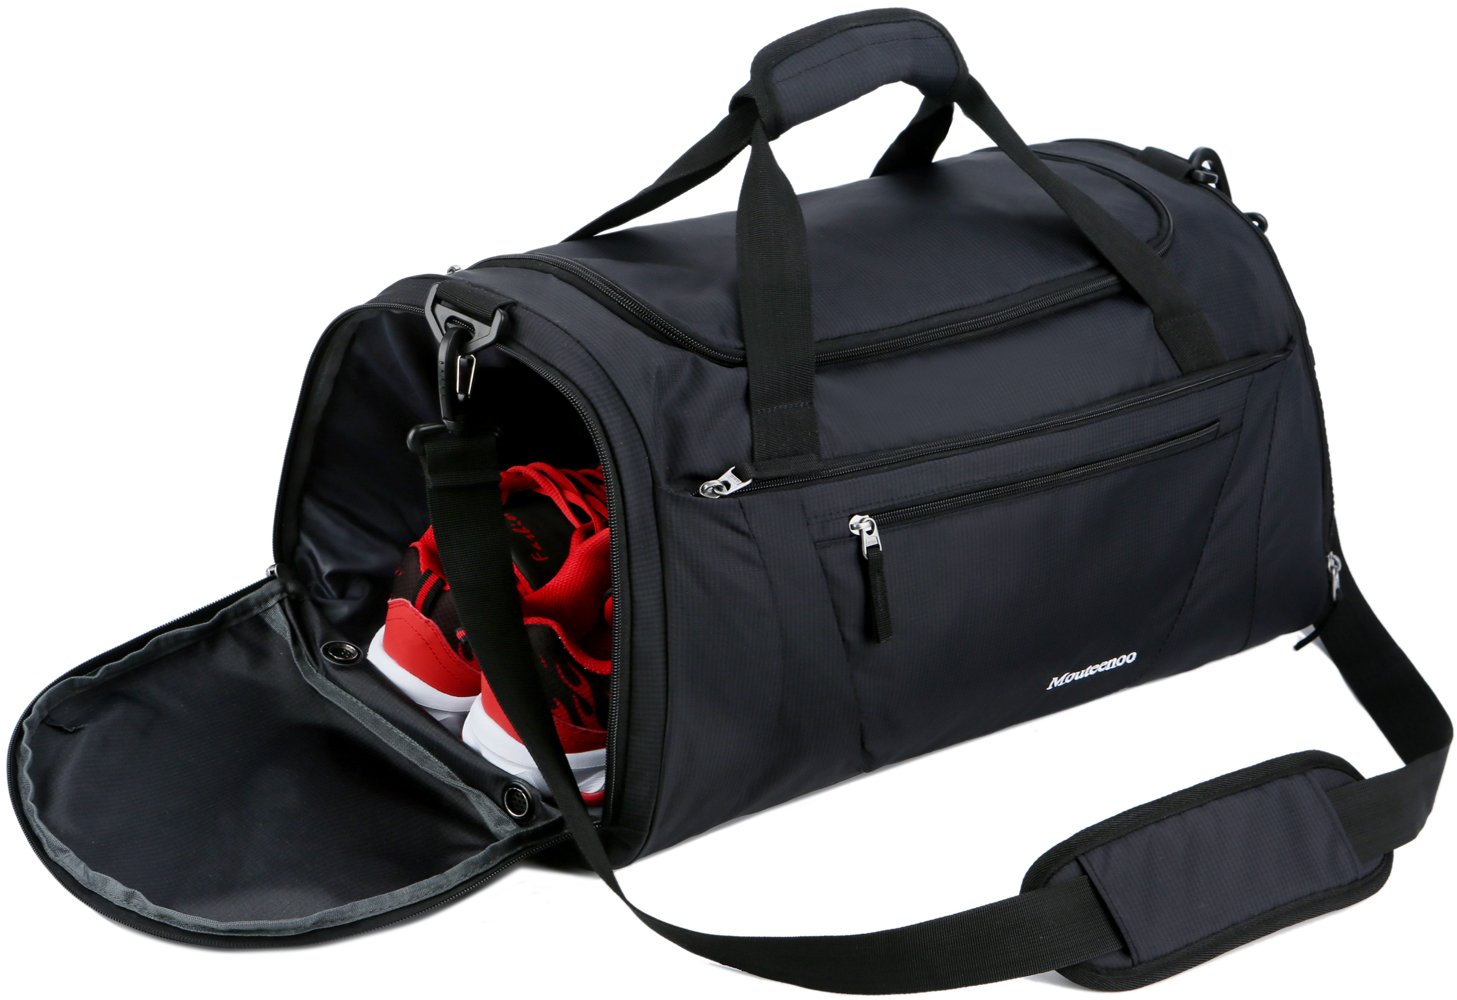 Gymbag-large-capacity-waterproof-multi-compartment-3